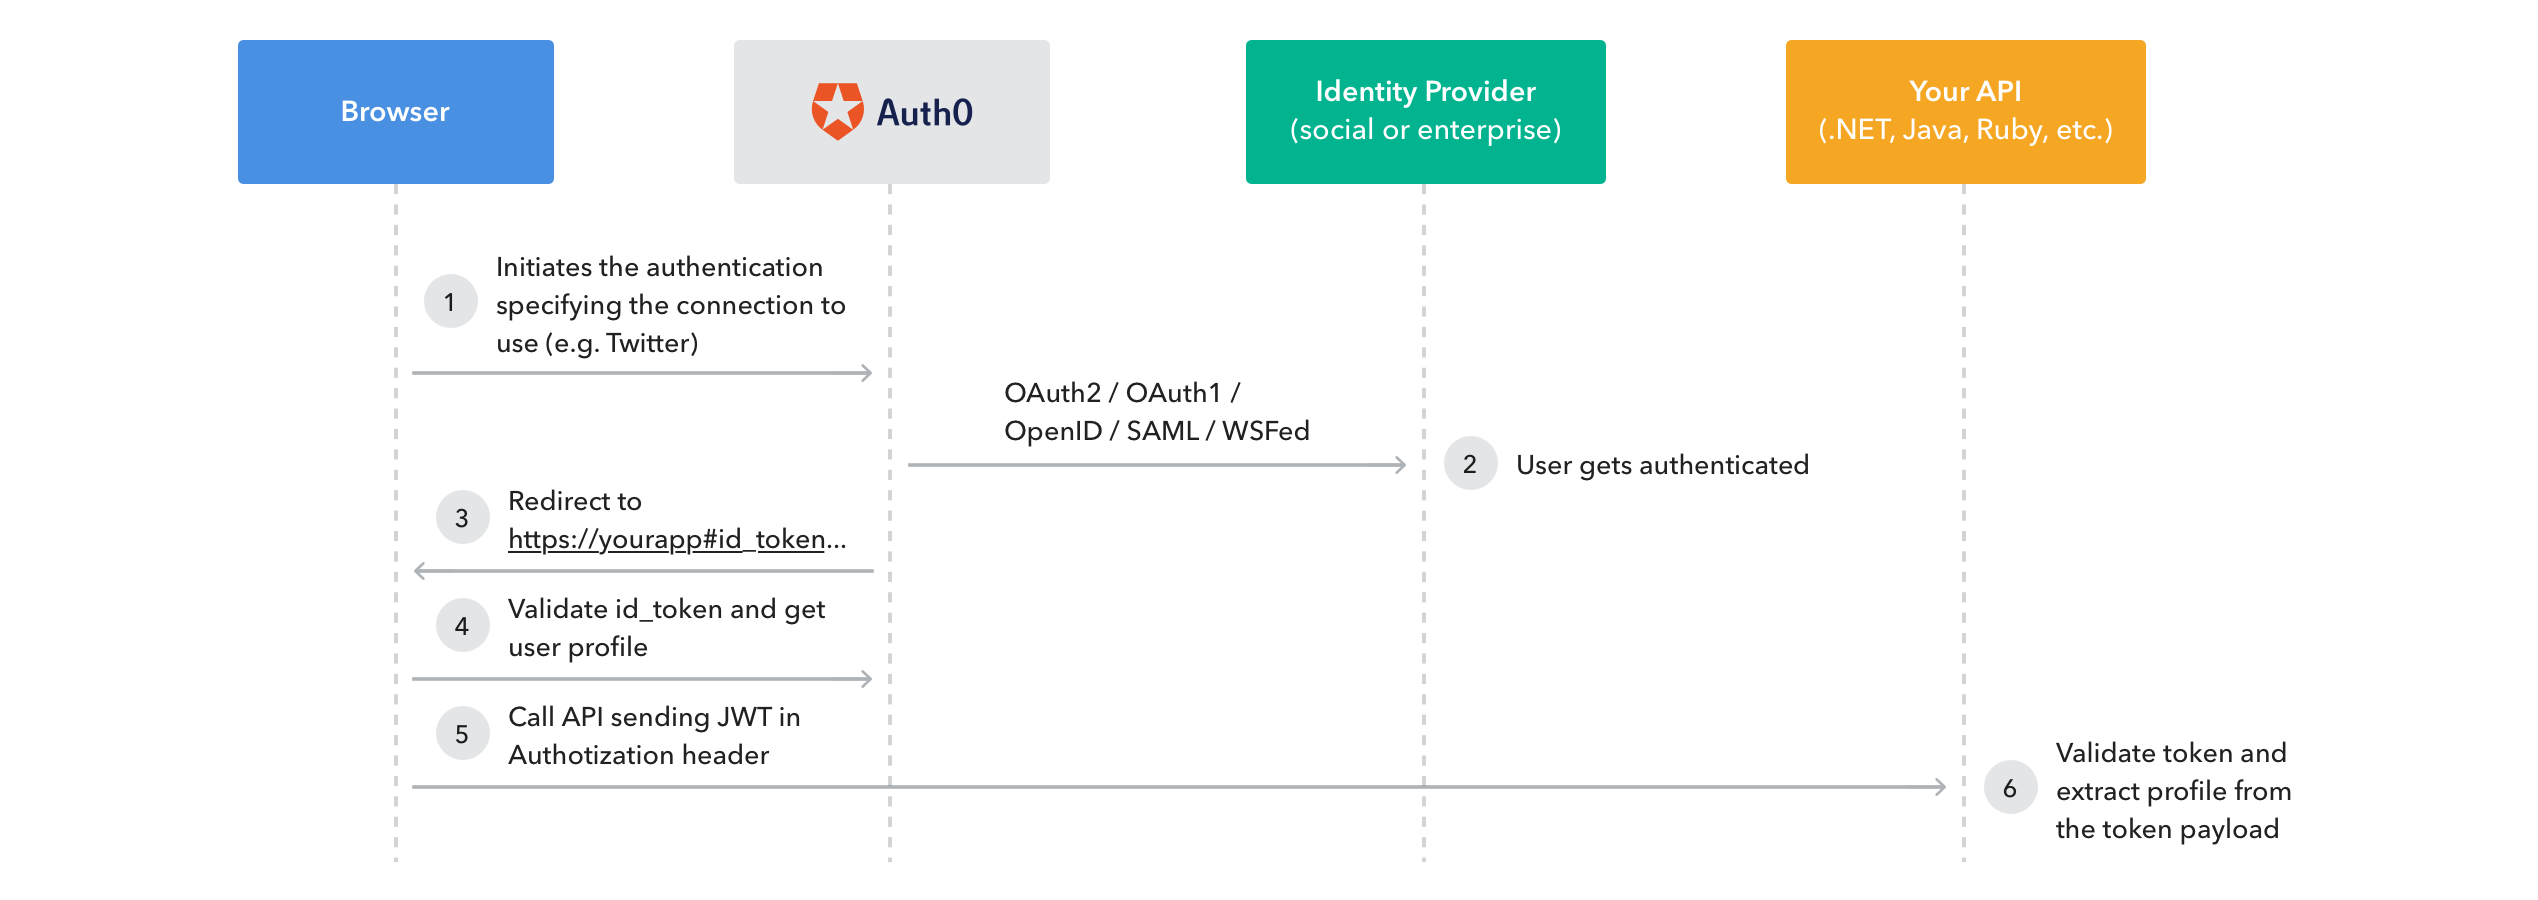 Auth0 and Identity Industry Standards